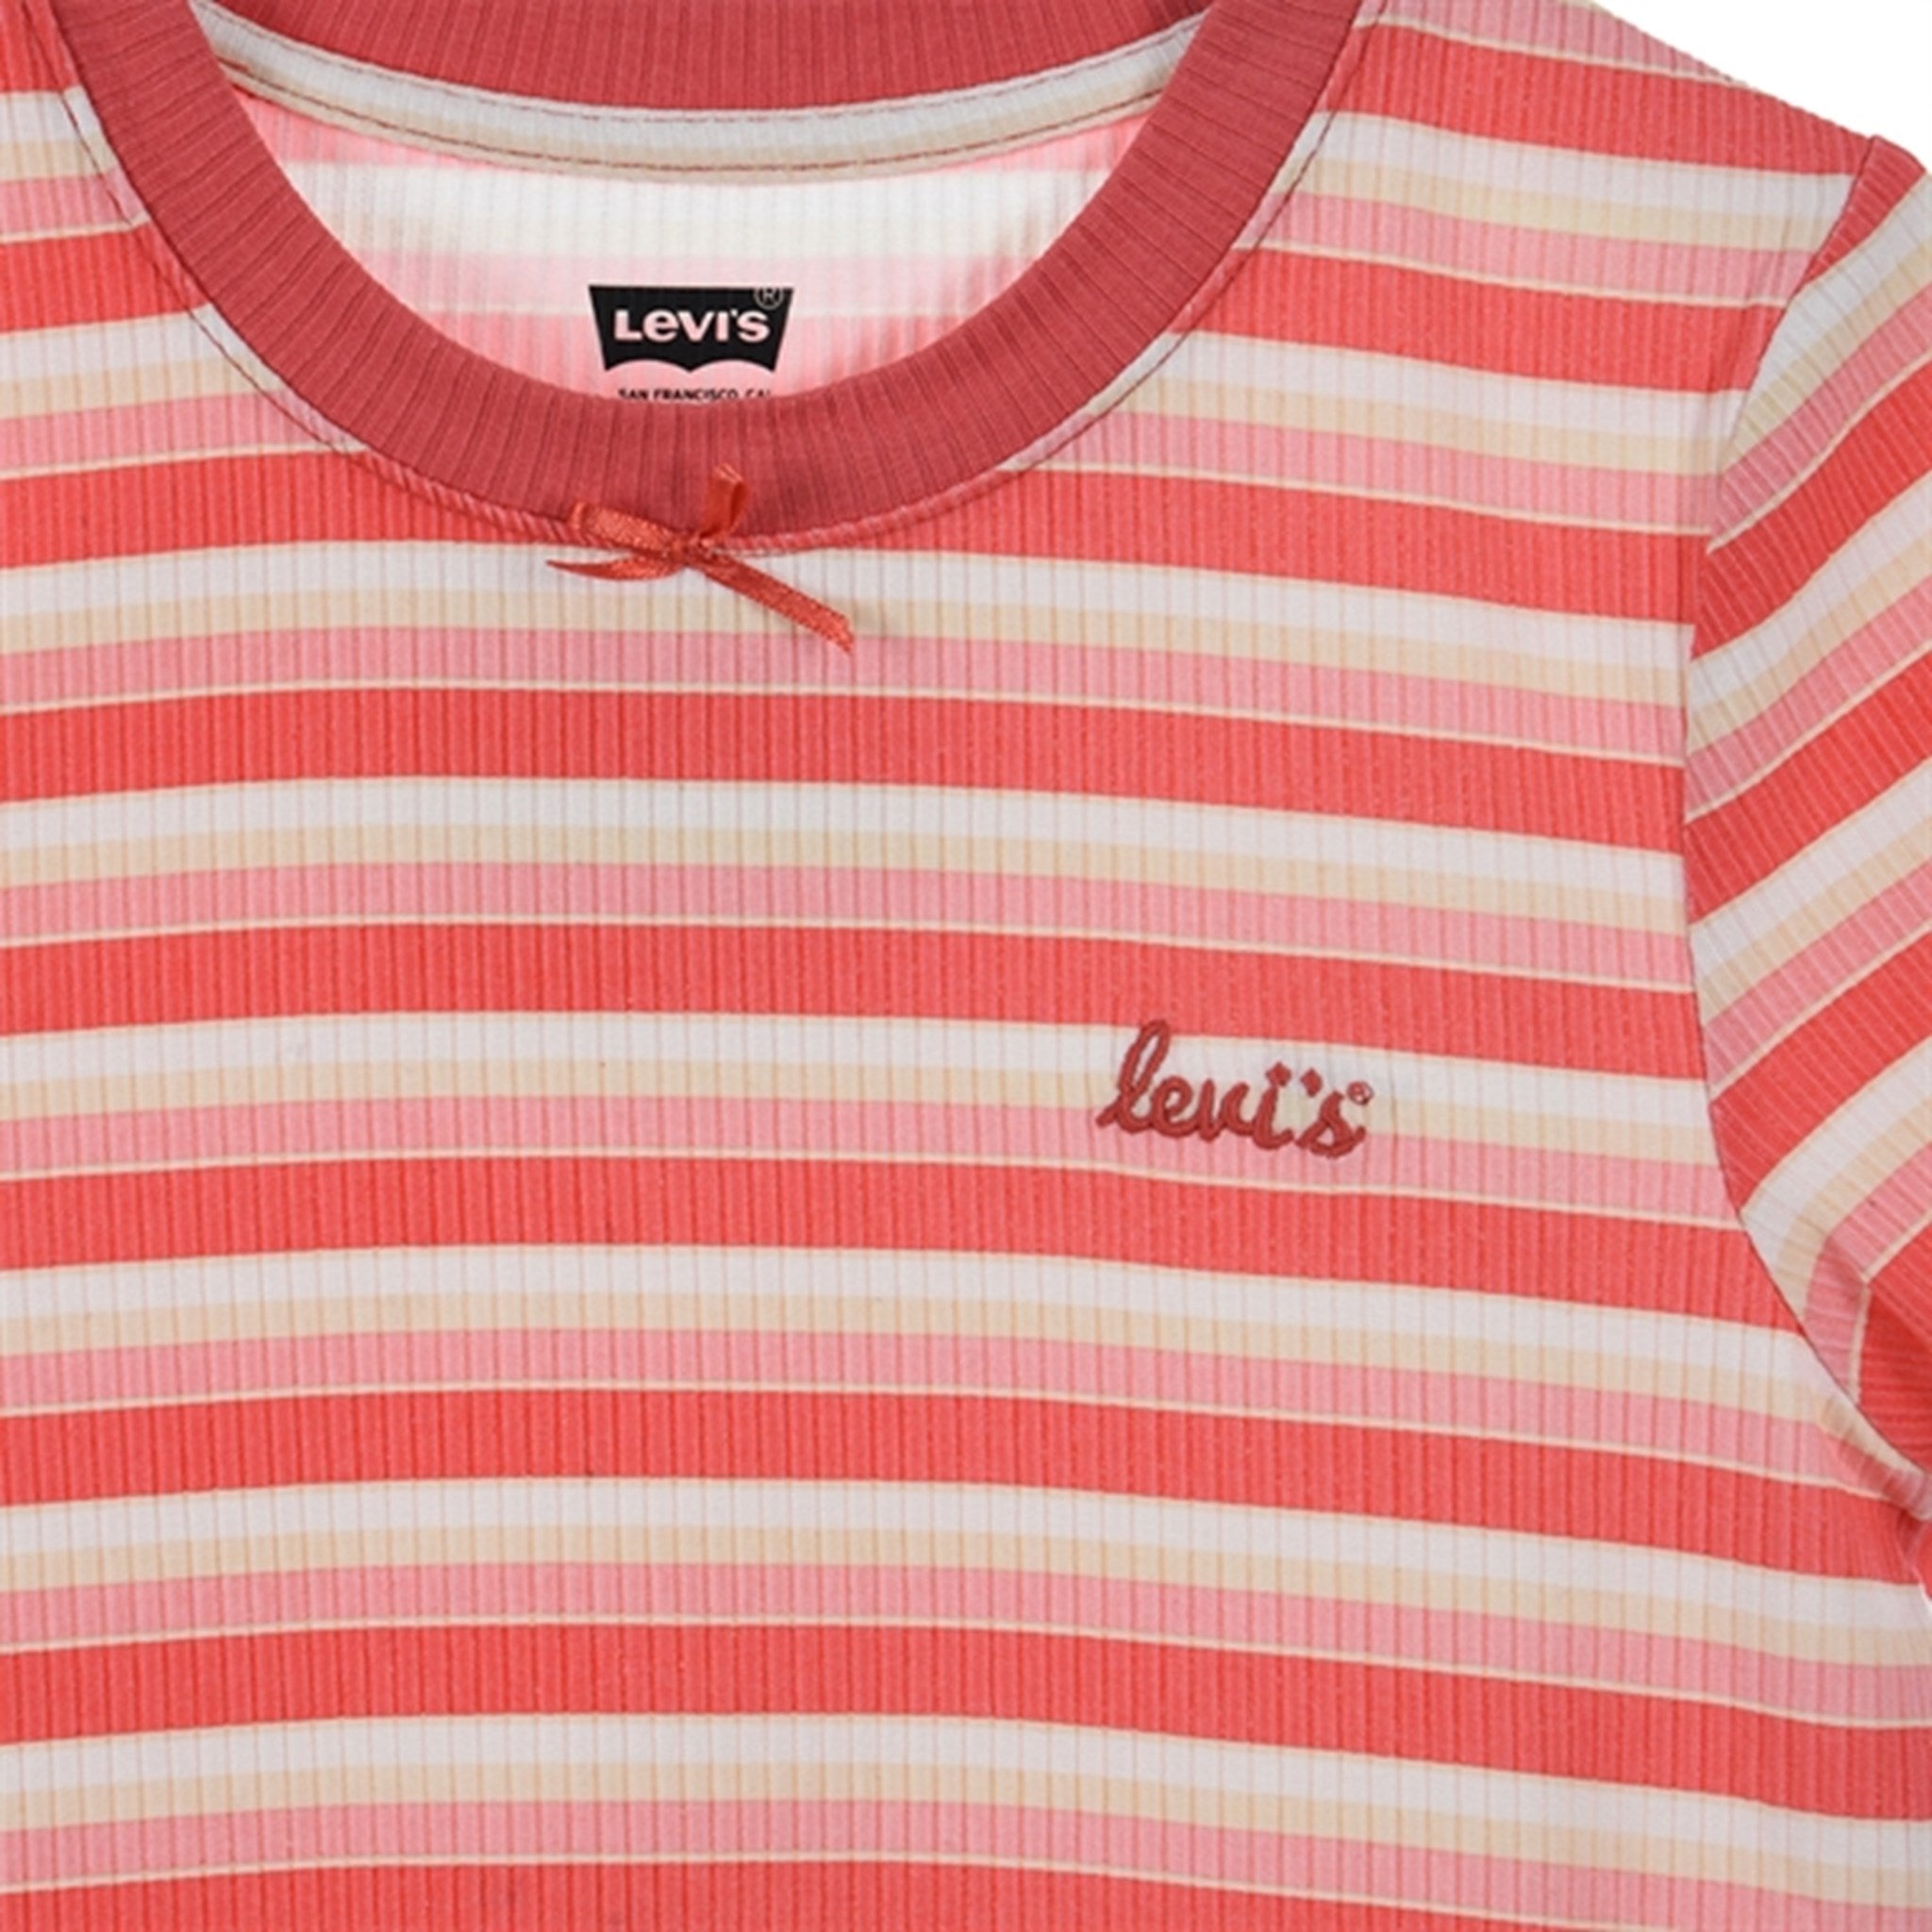 Levi's Striped Meet and Greet Topp Pink 2